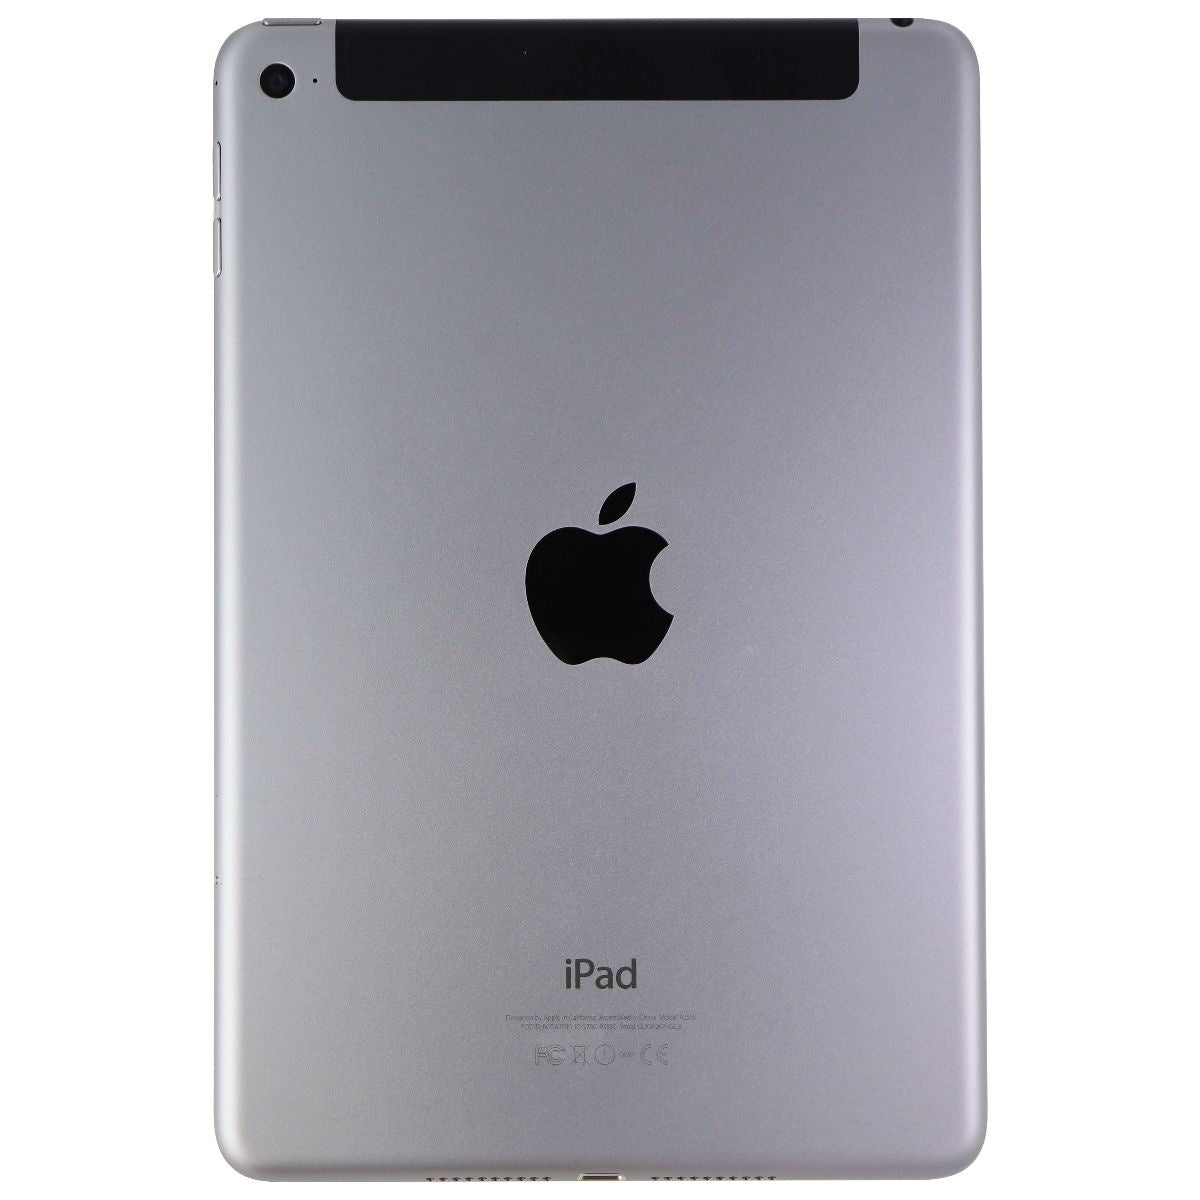 Apple iPad mini 7.9-inch (4th Generation) A1550 (Unlocked) - 32GB / Space Gray iPads, Tablets & eBook Readers Apple    - Simple Cell Bulk Wholesale Pricing - USA Seller